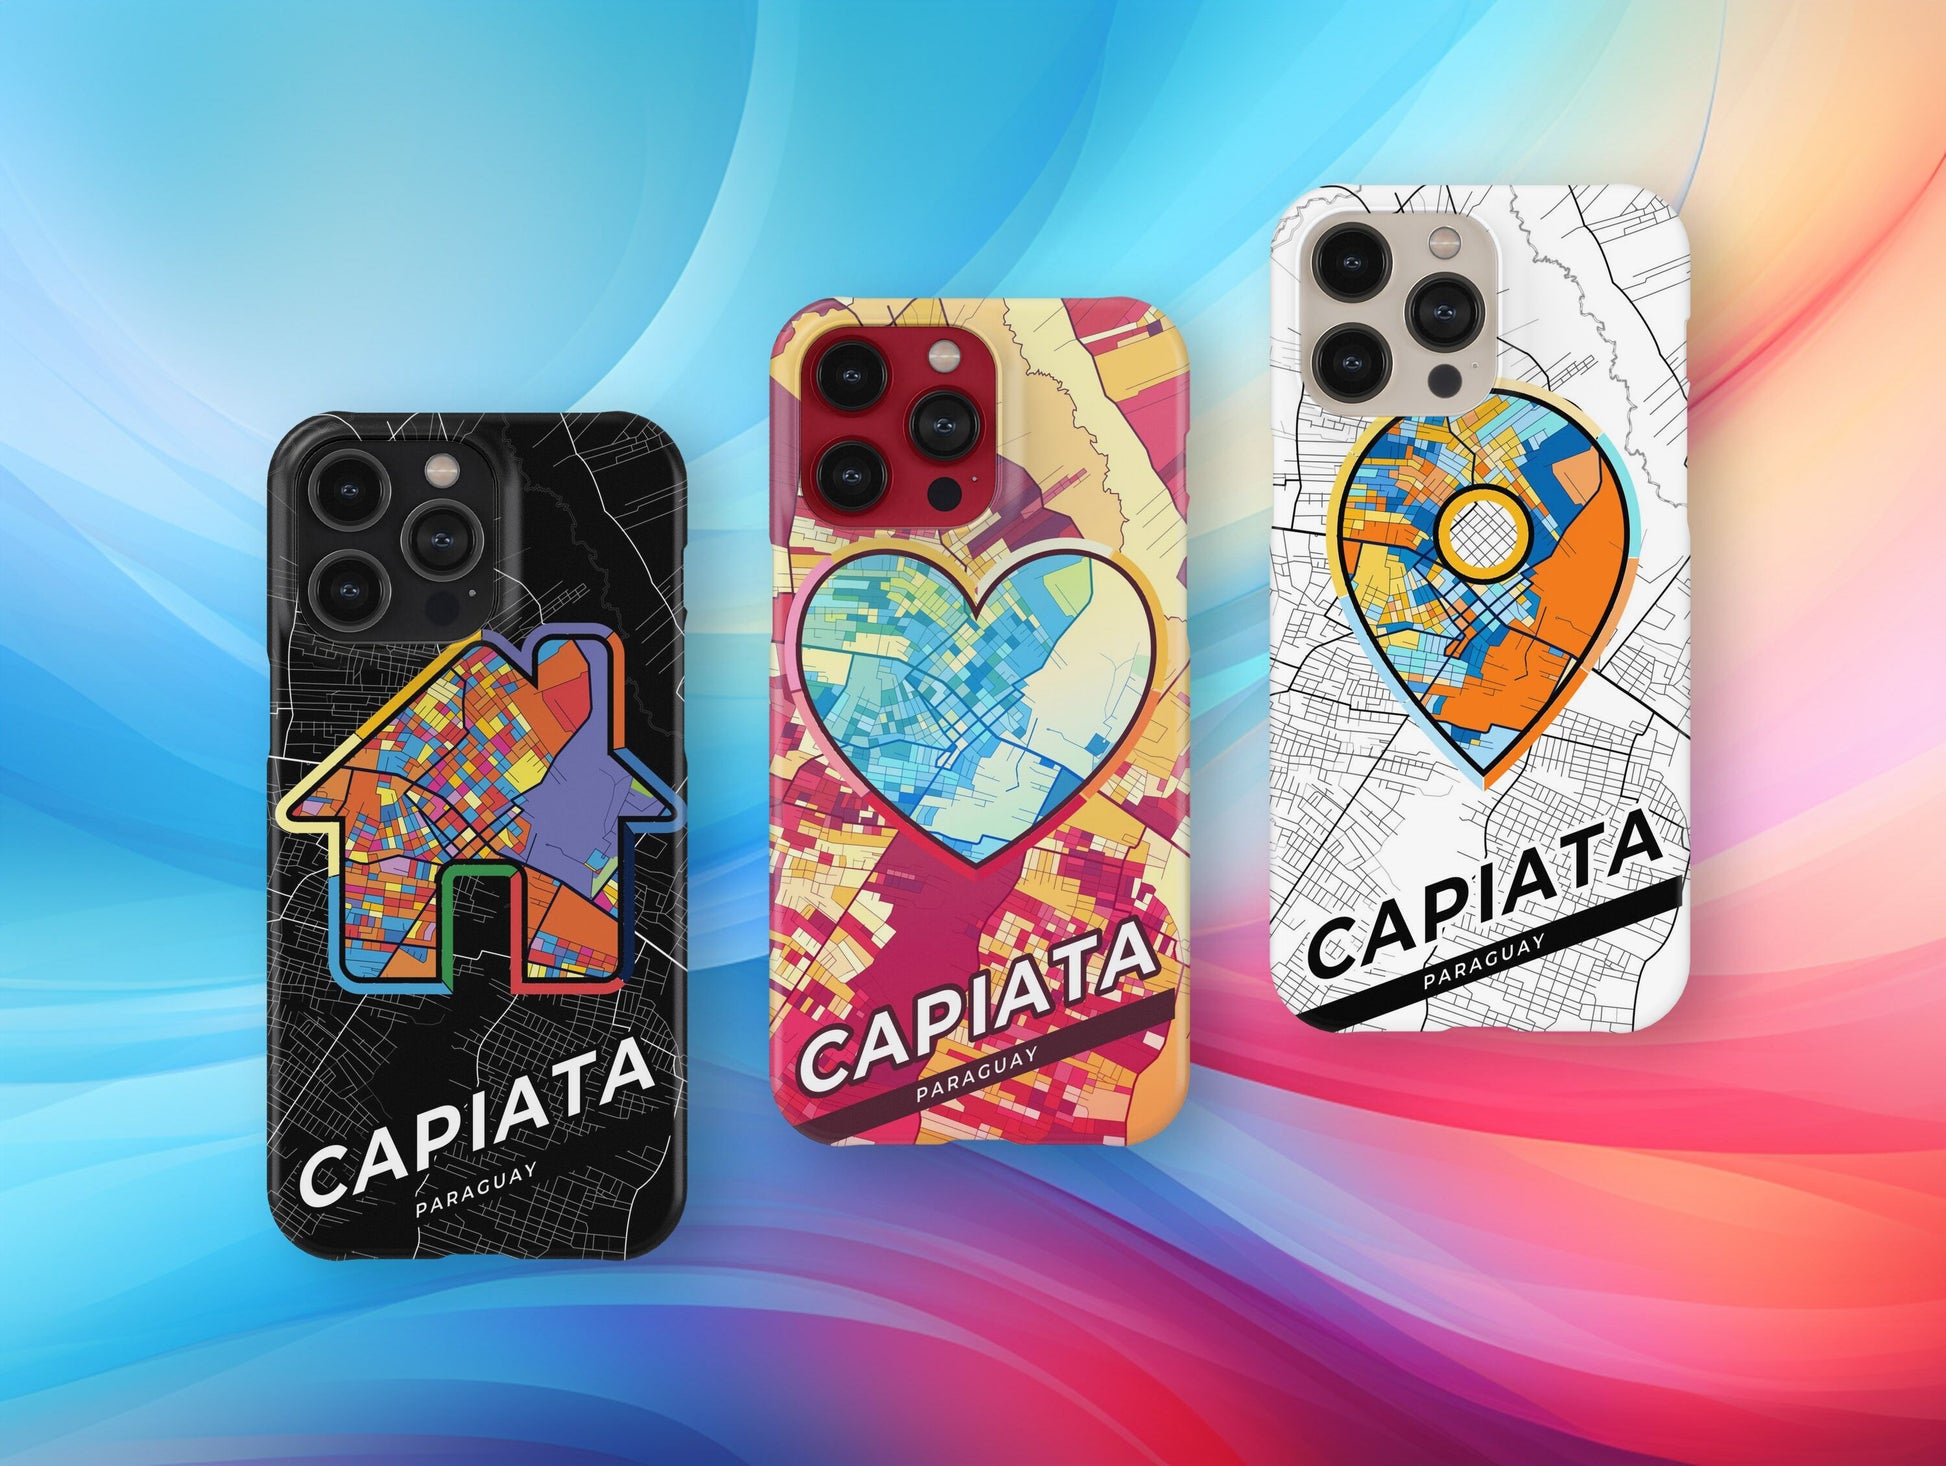 Capiata Paraguay slim phone case with colorful icon. Birthday, wedding or housewarming gift. Couple match cases.